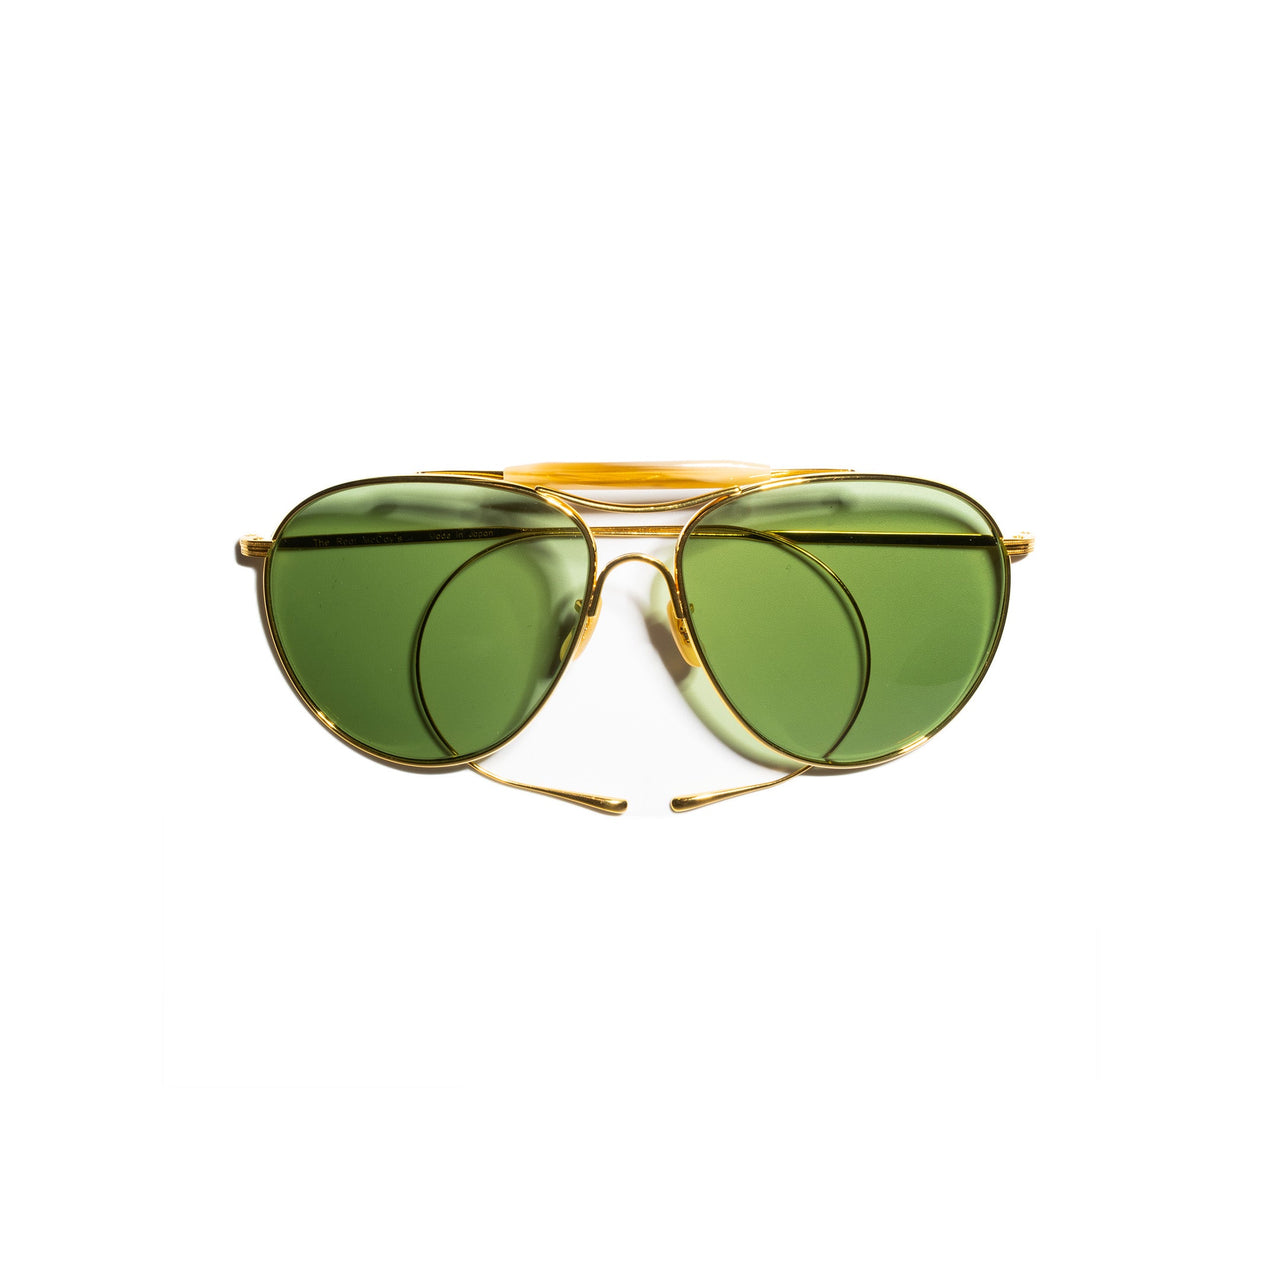 The Real McCoy's Aviator Flying Sun Gold-Sunglasses-Clutch Cafe